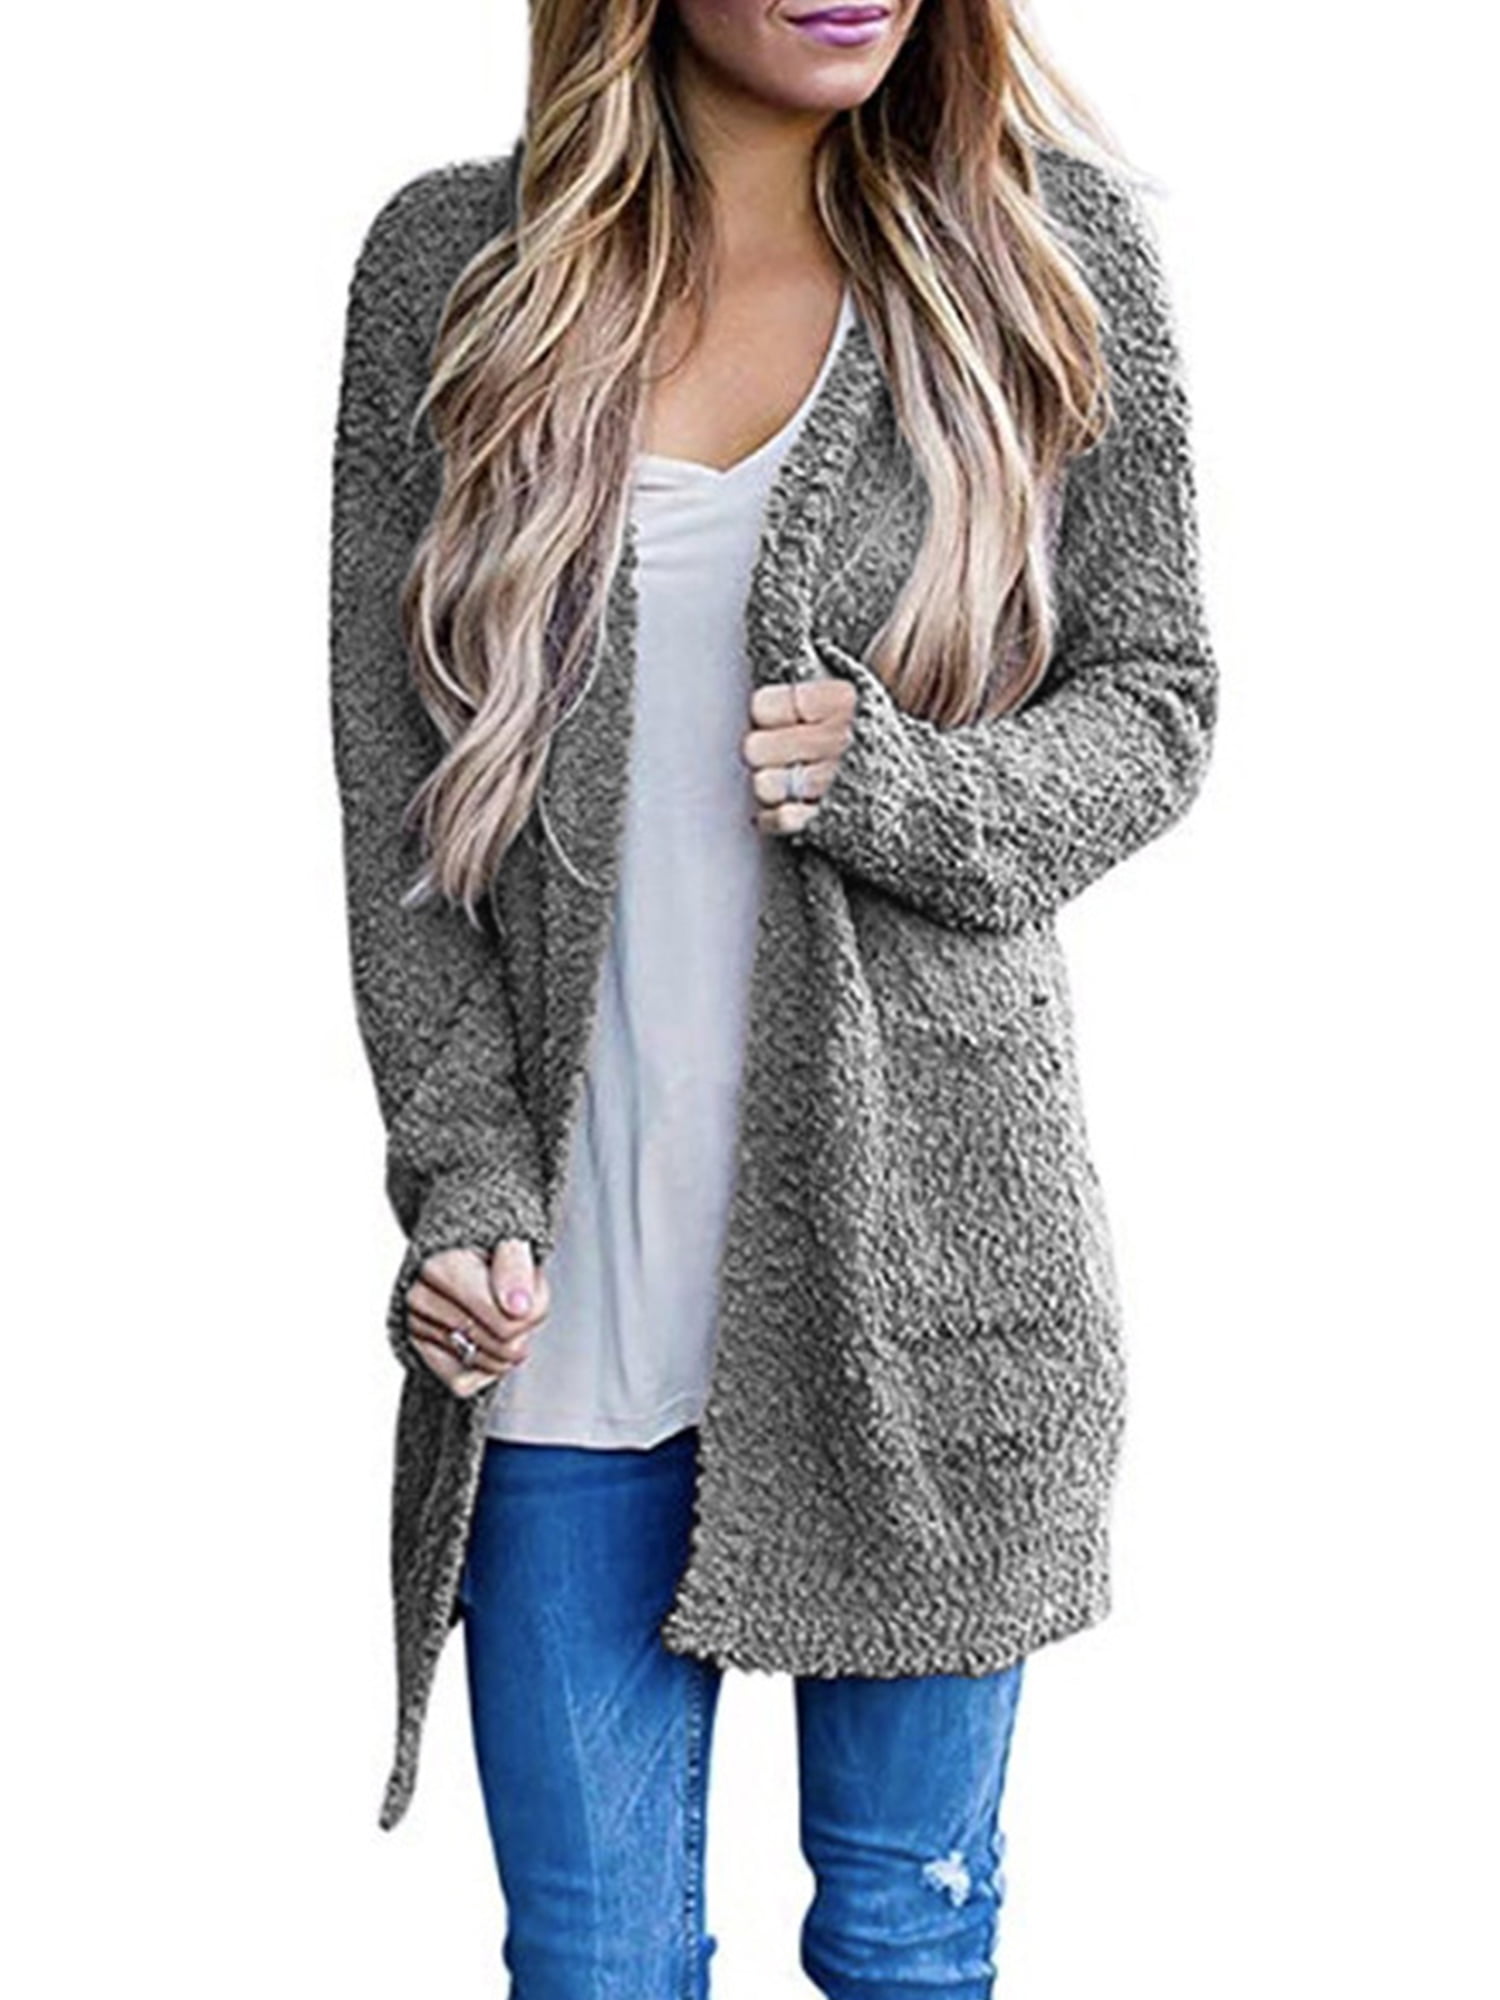 Lataw Women Coat Casual Long Sleeve Open Front Soft Patchwork Chunky Knitted Pocket Sweater Outerwear Jacket 